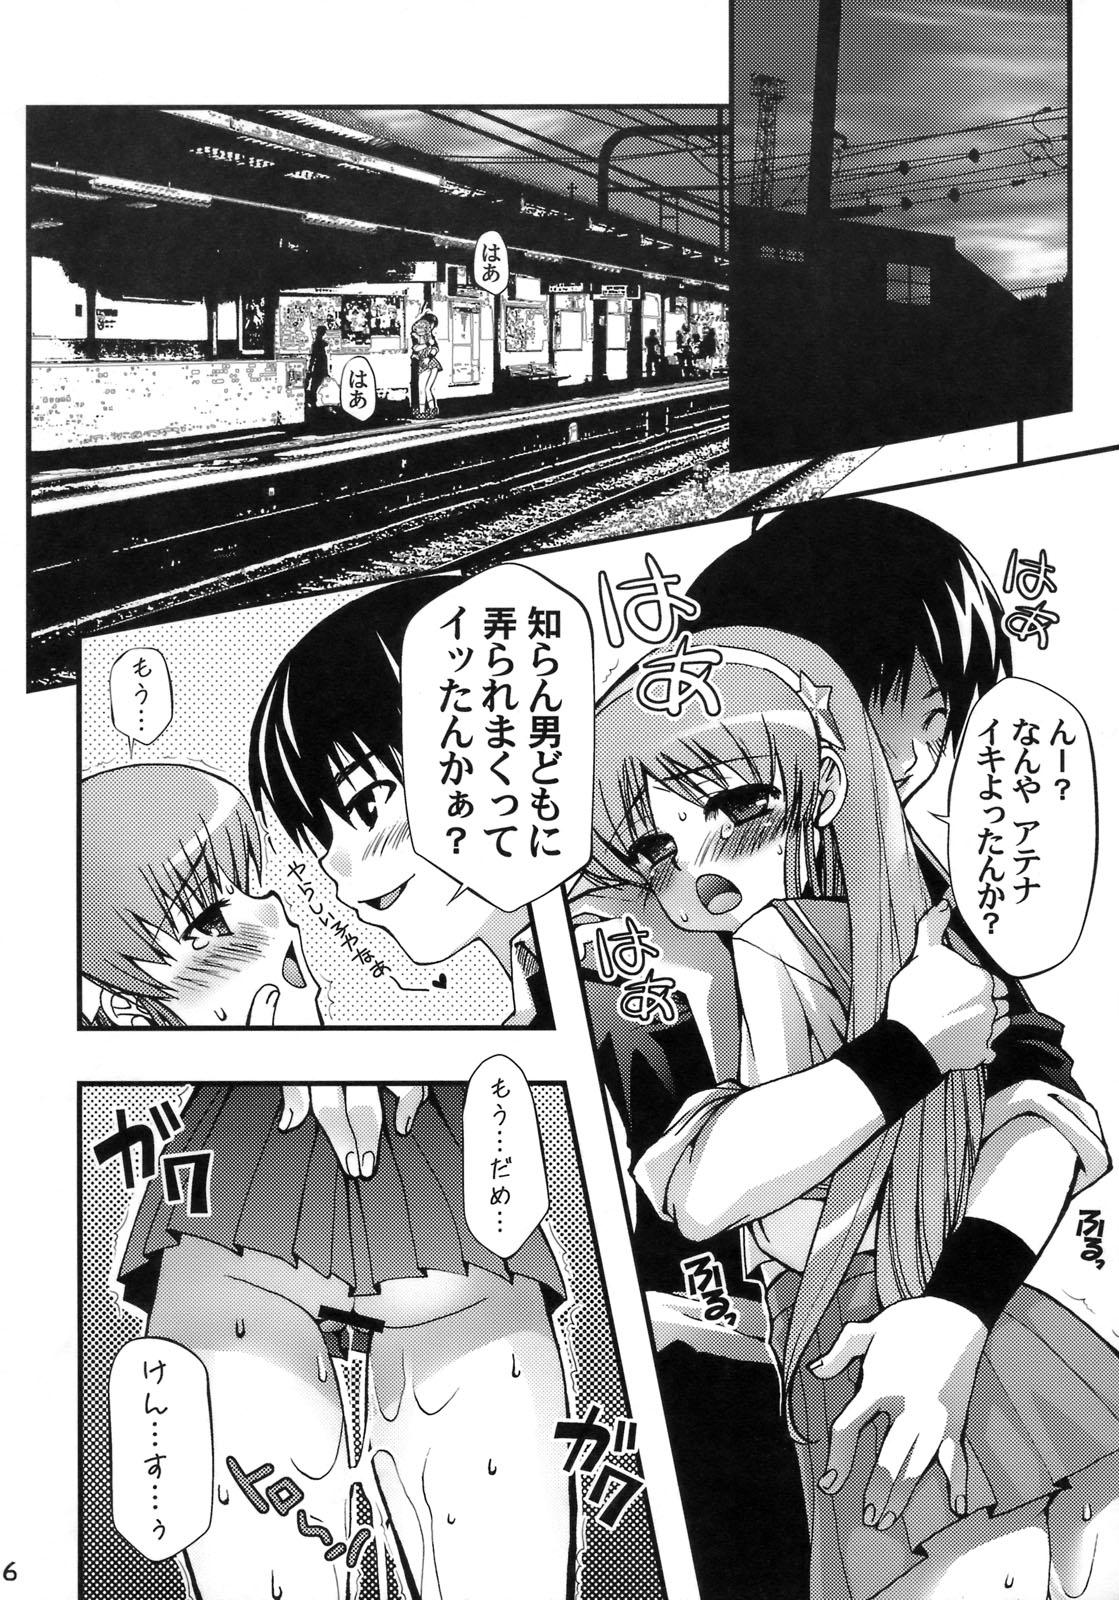 Student Haji - King of fighters Girl Sucking Dick - Page 5